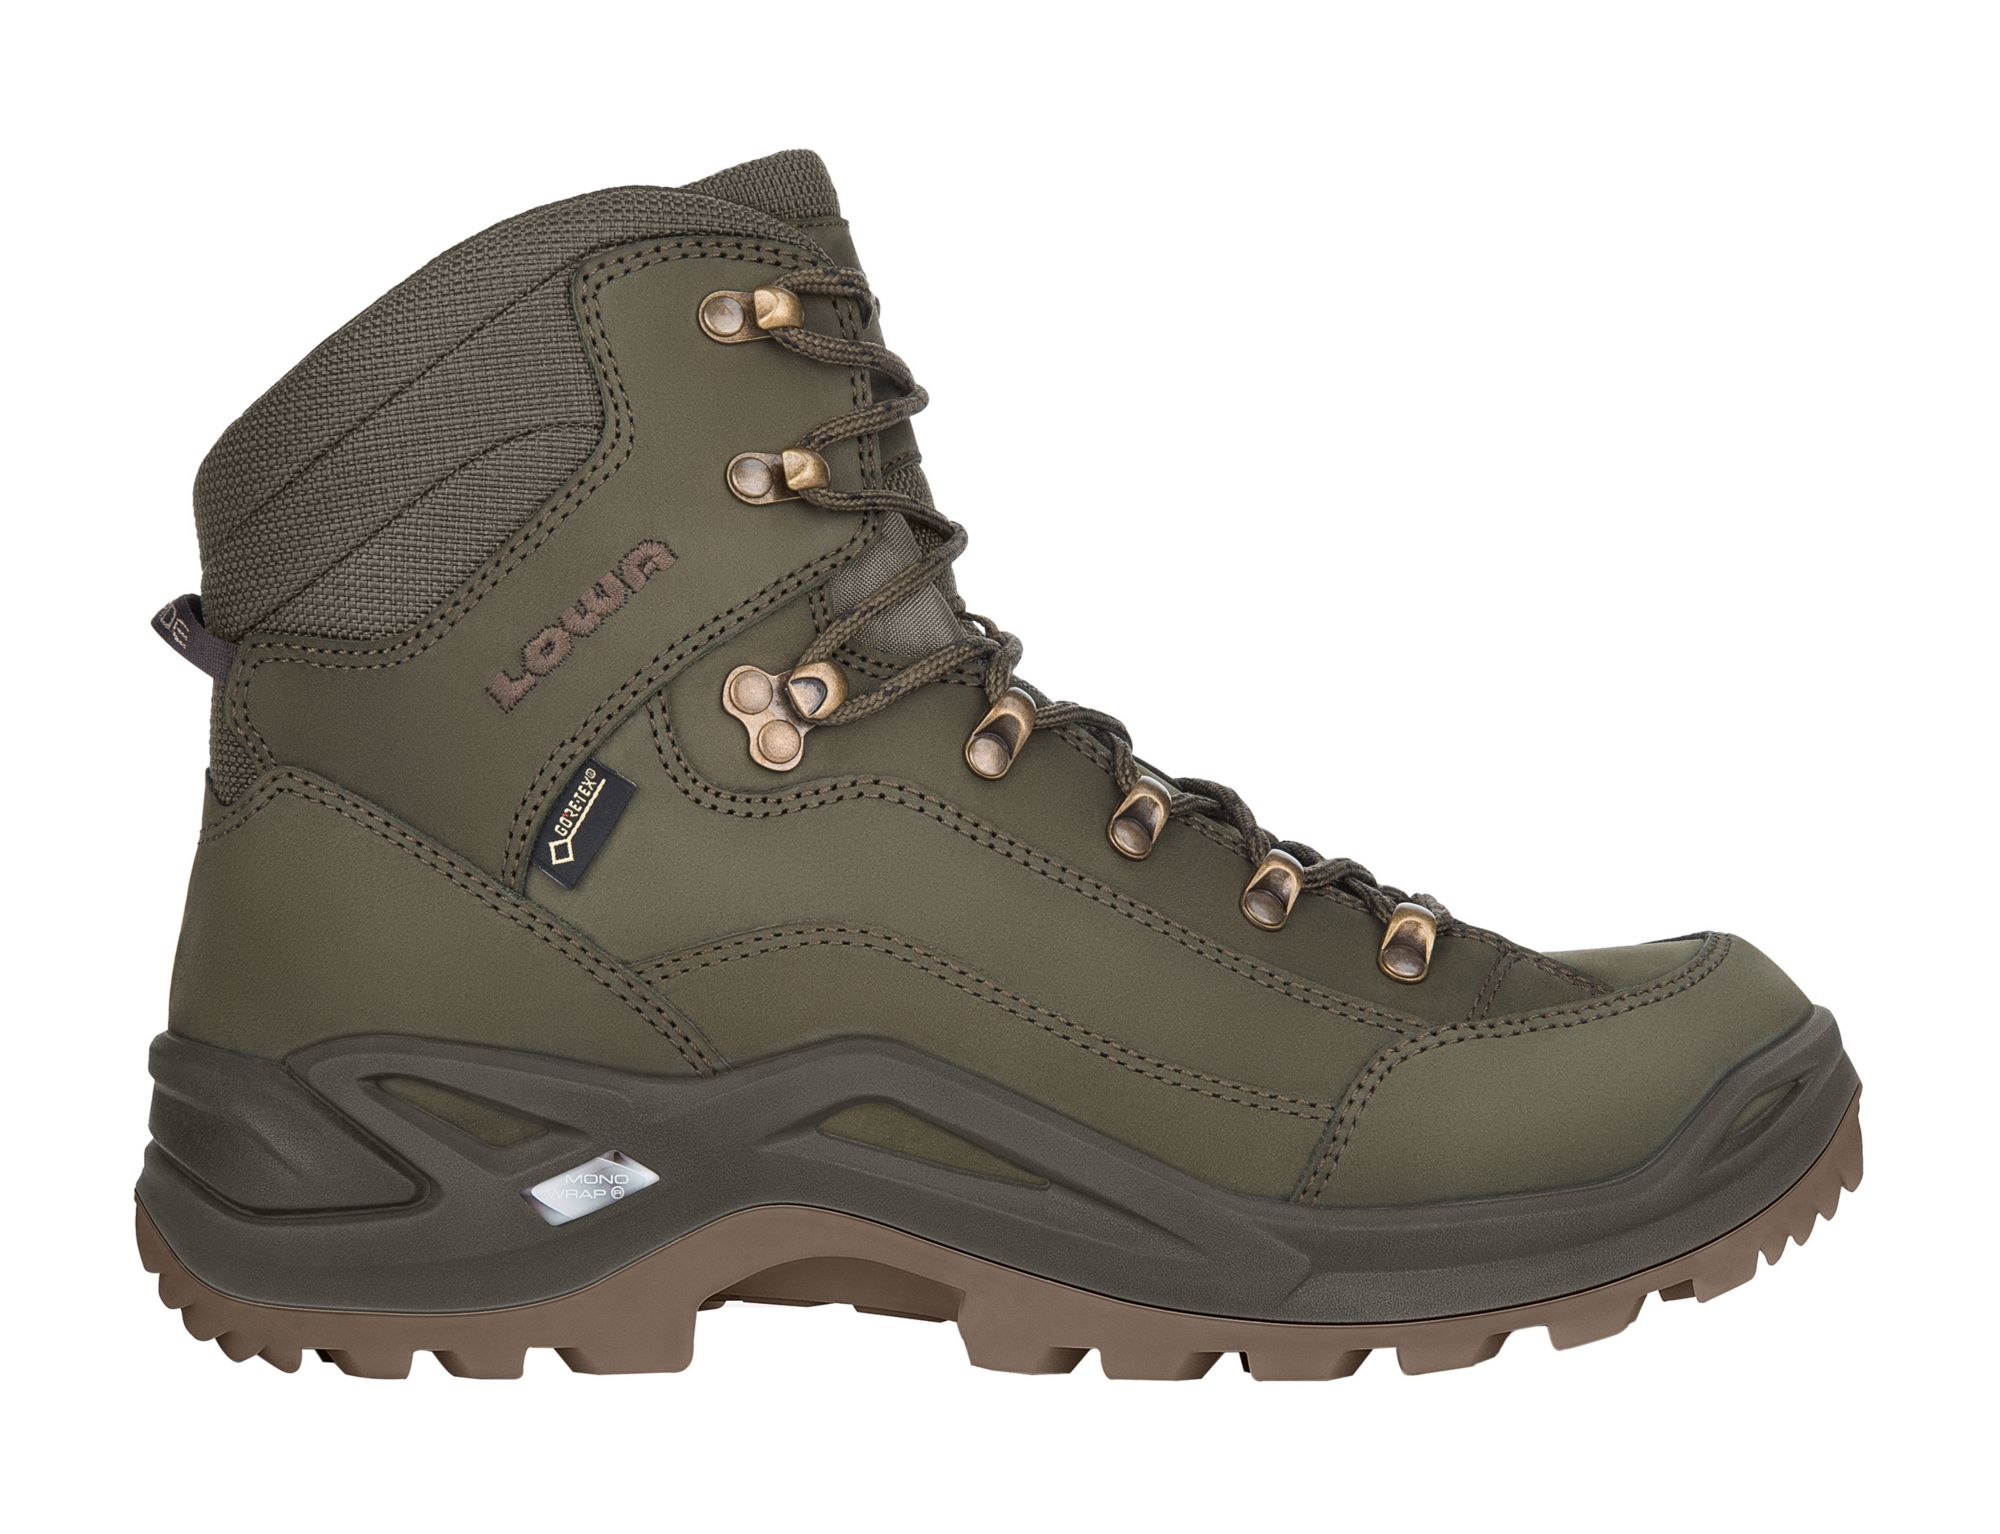 Photos - Trekking Shoes LOWA Men's Renegade GTX Mid Boots, Size 10, Basil | Father's Day Gift Idea 